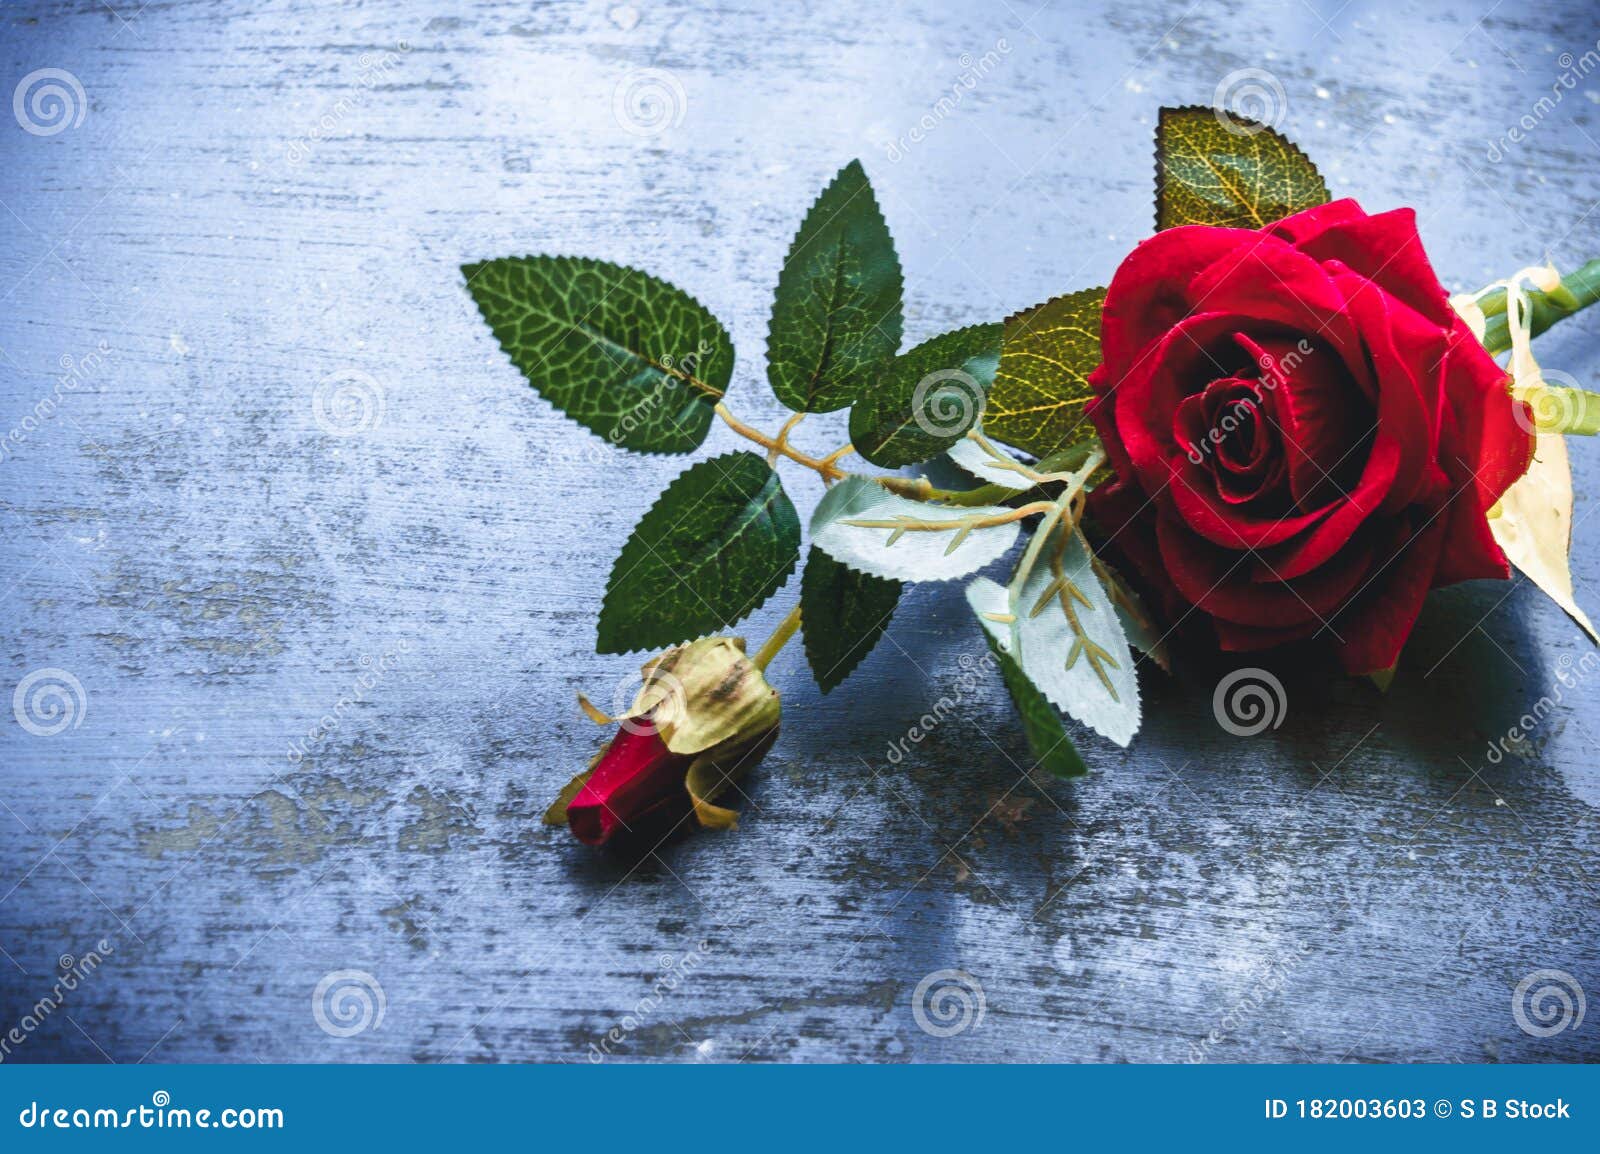 Red rose flower on rustic floor Nature still life love romantic background  theme Wallpaper web banner design decoration for friendship and valentine  Stock Photo  Alamy